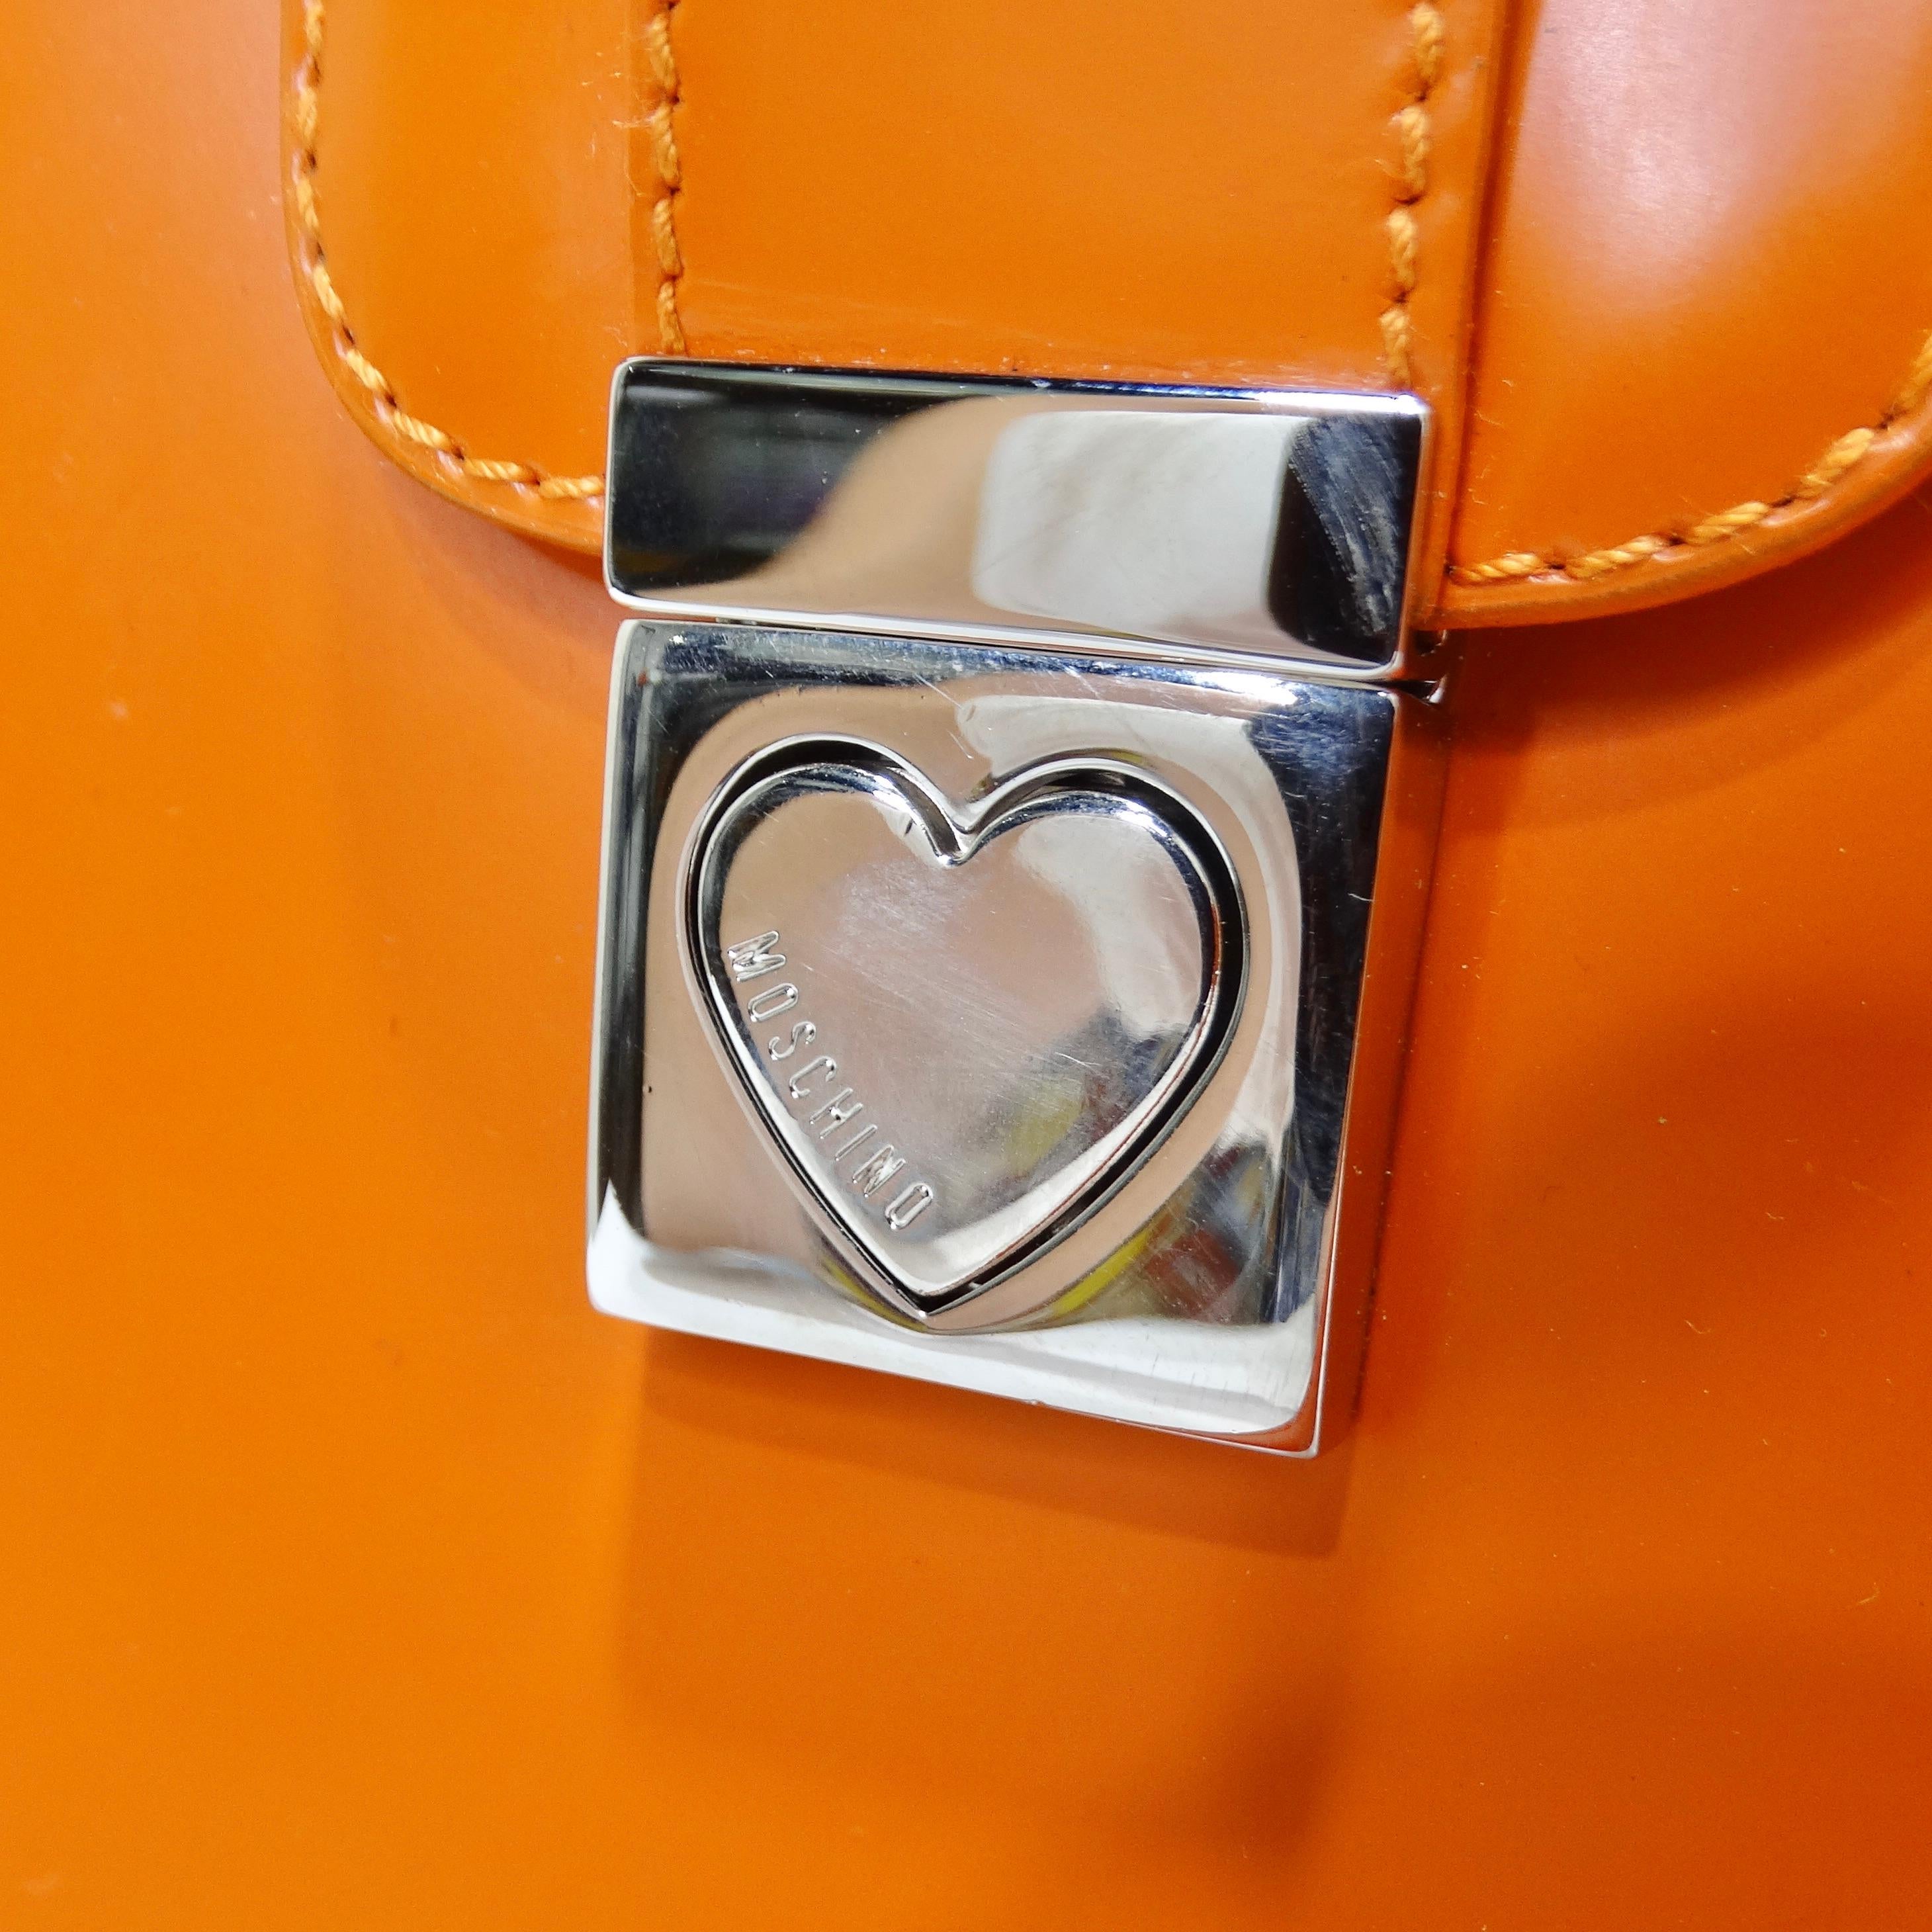 Moschino Orange Top Handle Leather Handbag In Excellent Condition For Sale In Scottsdale, AZ